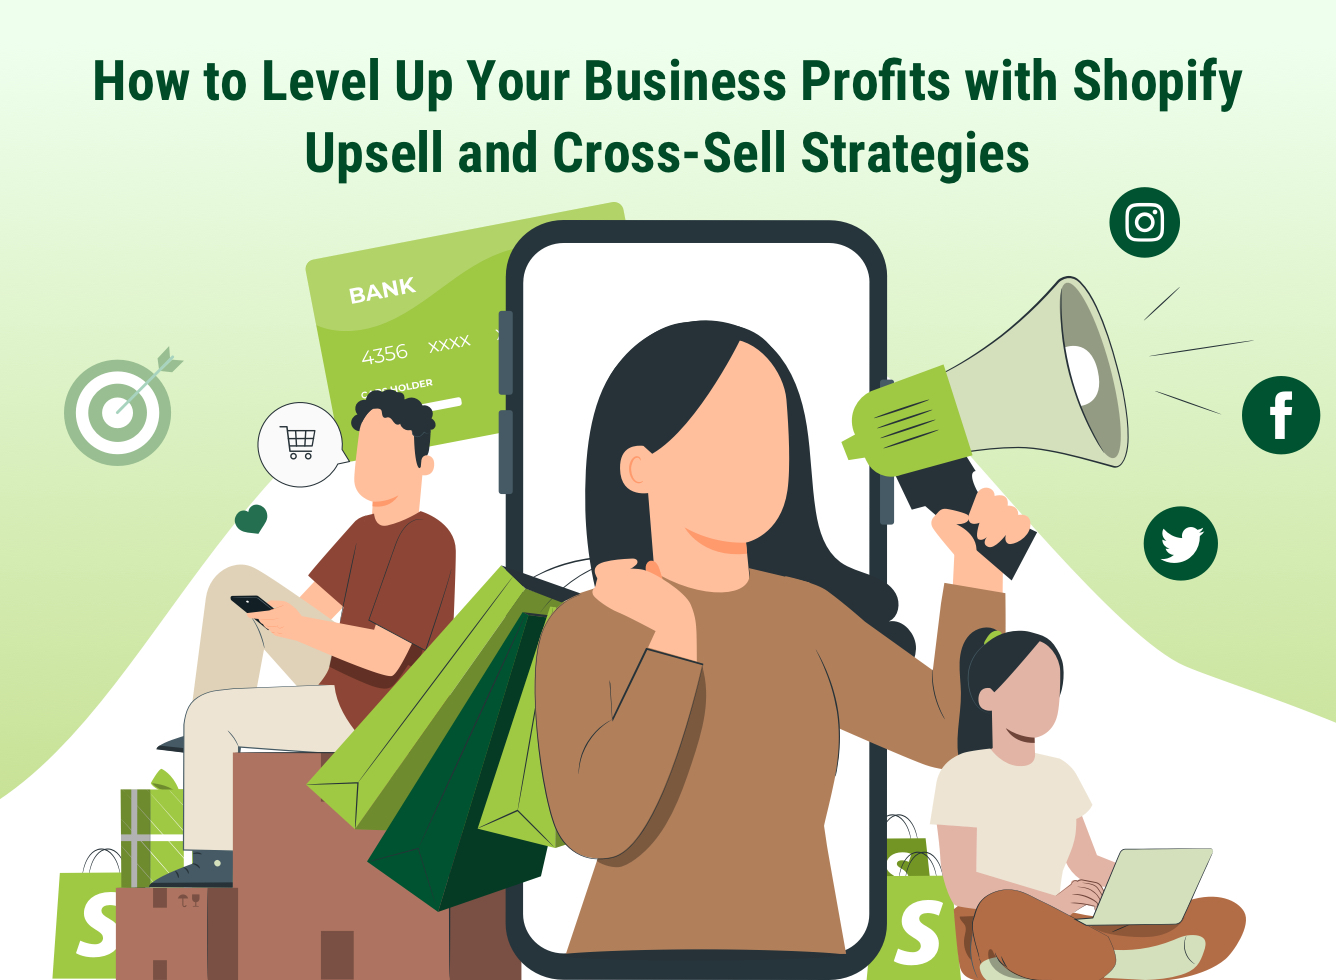 How to Level Up Your Business Profits with Shopify Upsell and Cross-Sell Strategies